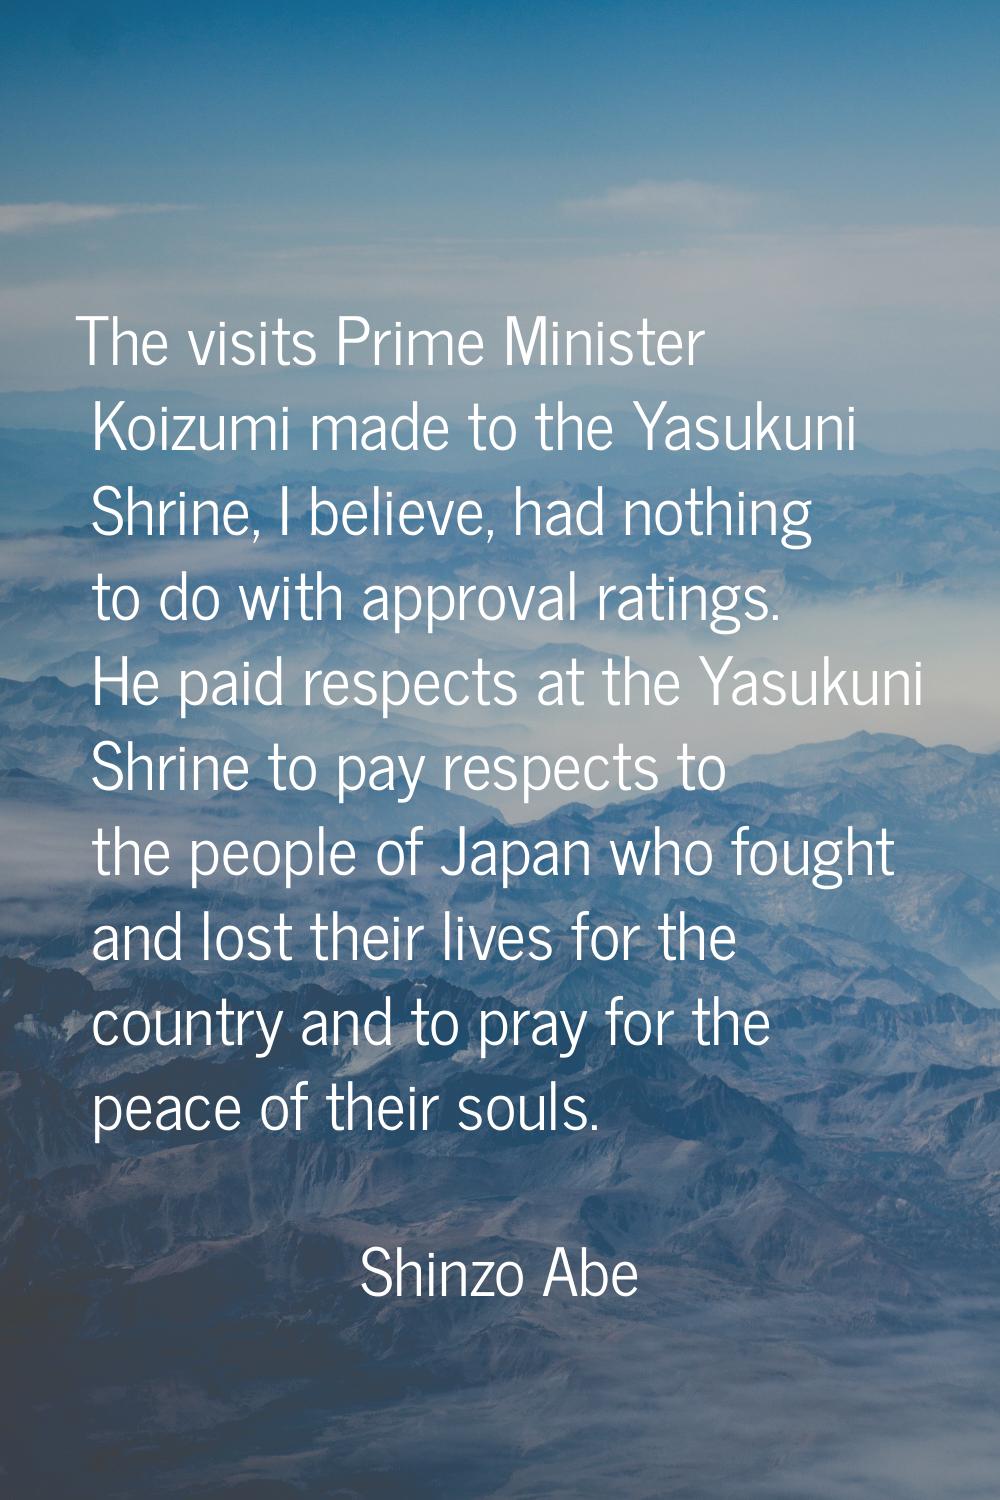 The visits Prime Minister Koizumi made to the Yasukuni Shrine, I believe, had nothing to do with ap